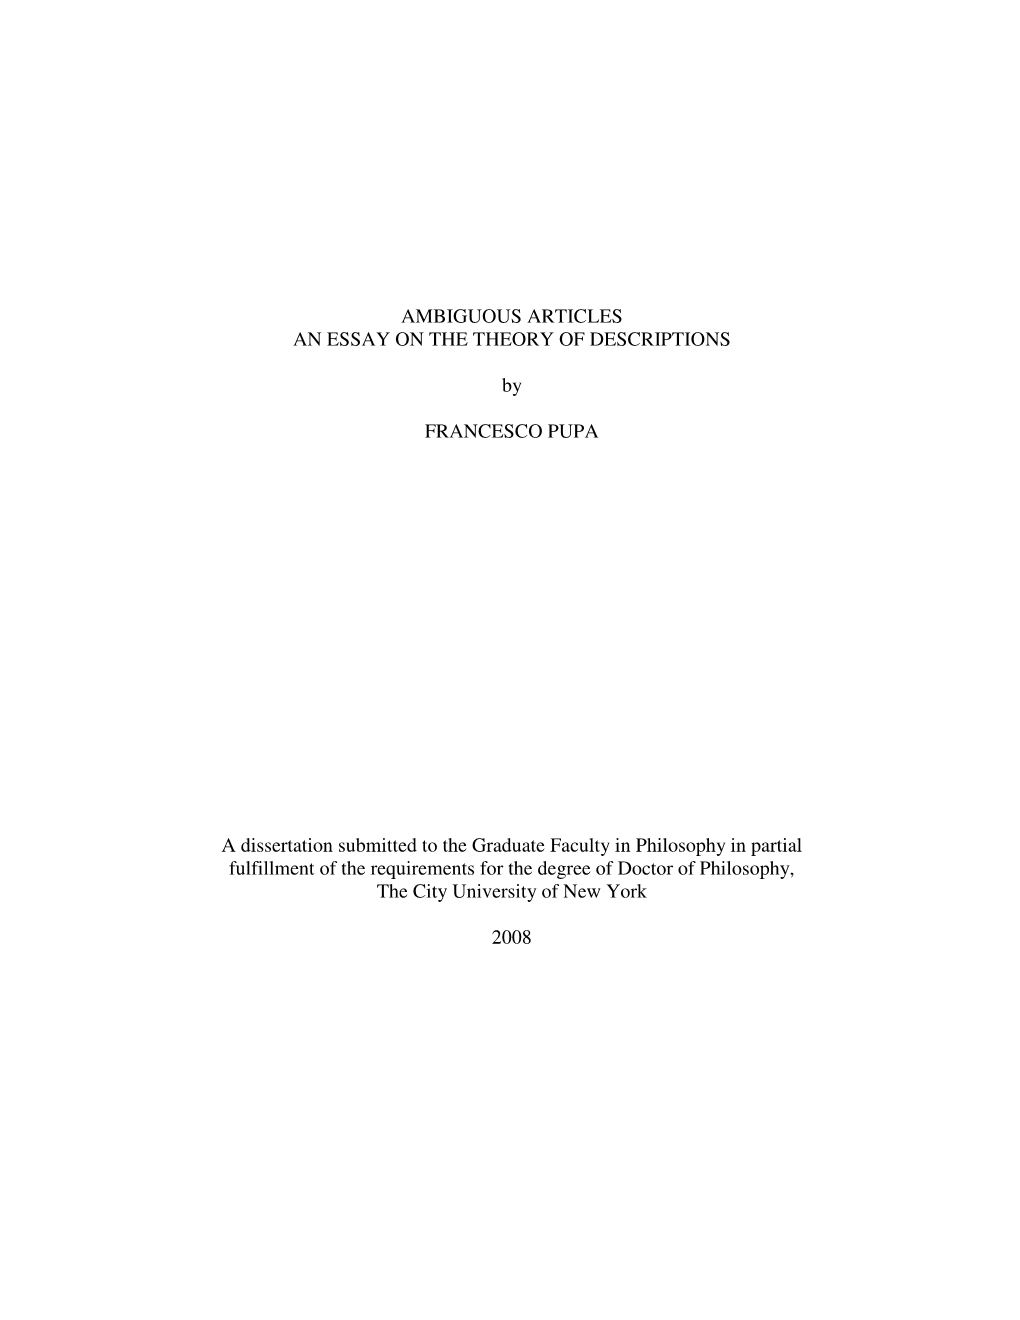 AMBIGUOUS ARTICLES an ESSAY on the THEORY of DESCRIPTIONS by FRANCESCO PUPA a Dissertation Submitted to the Graduate Faculty In